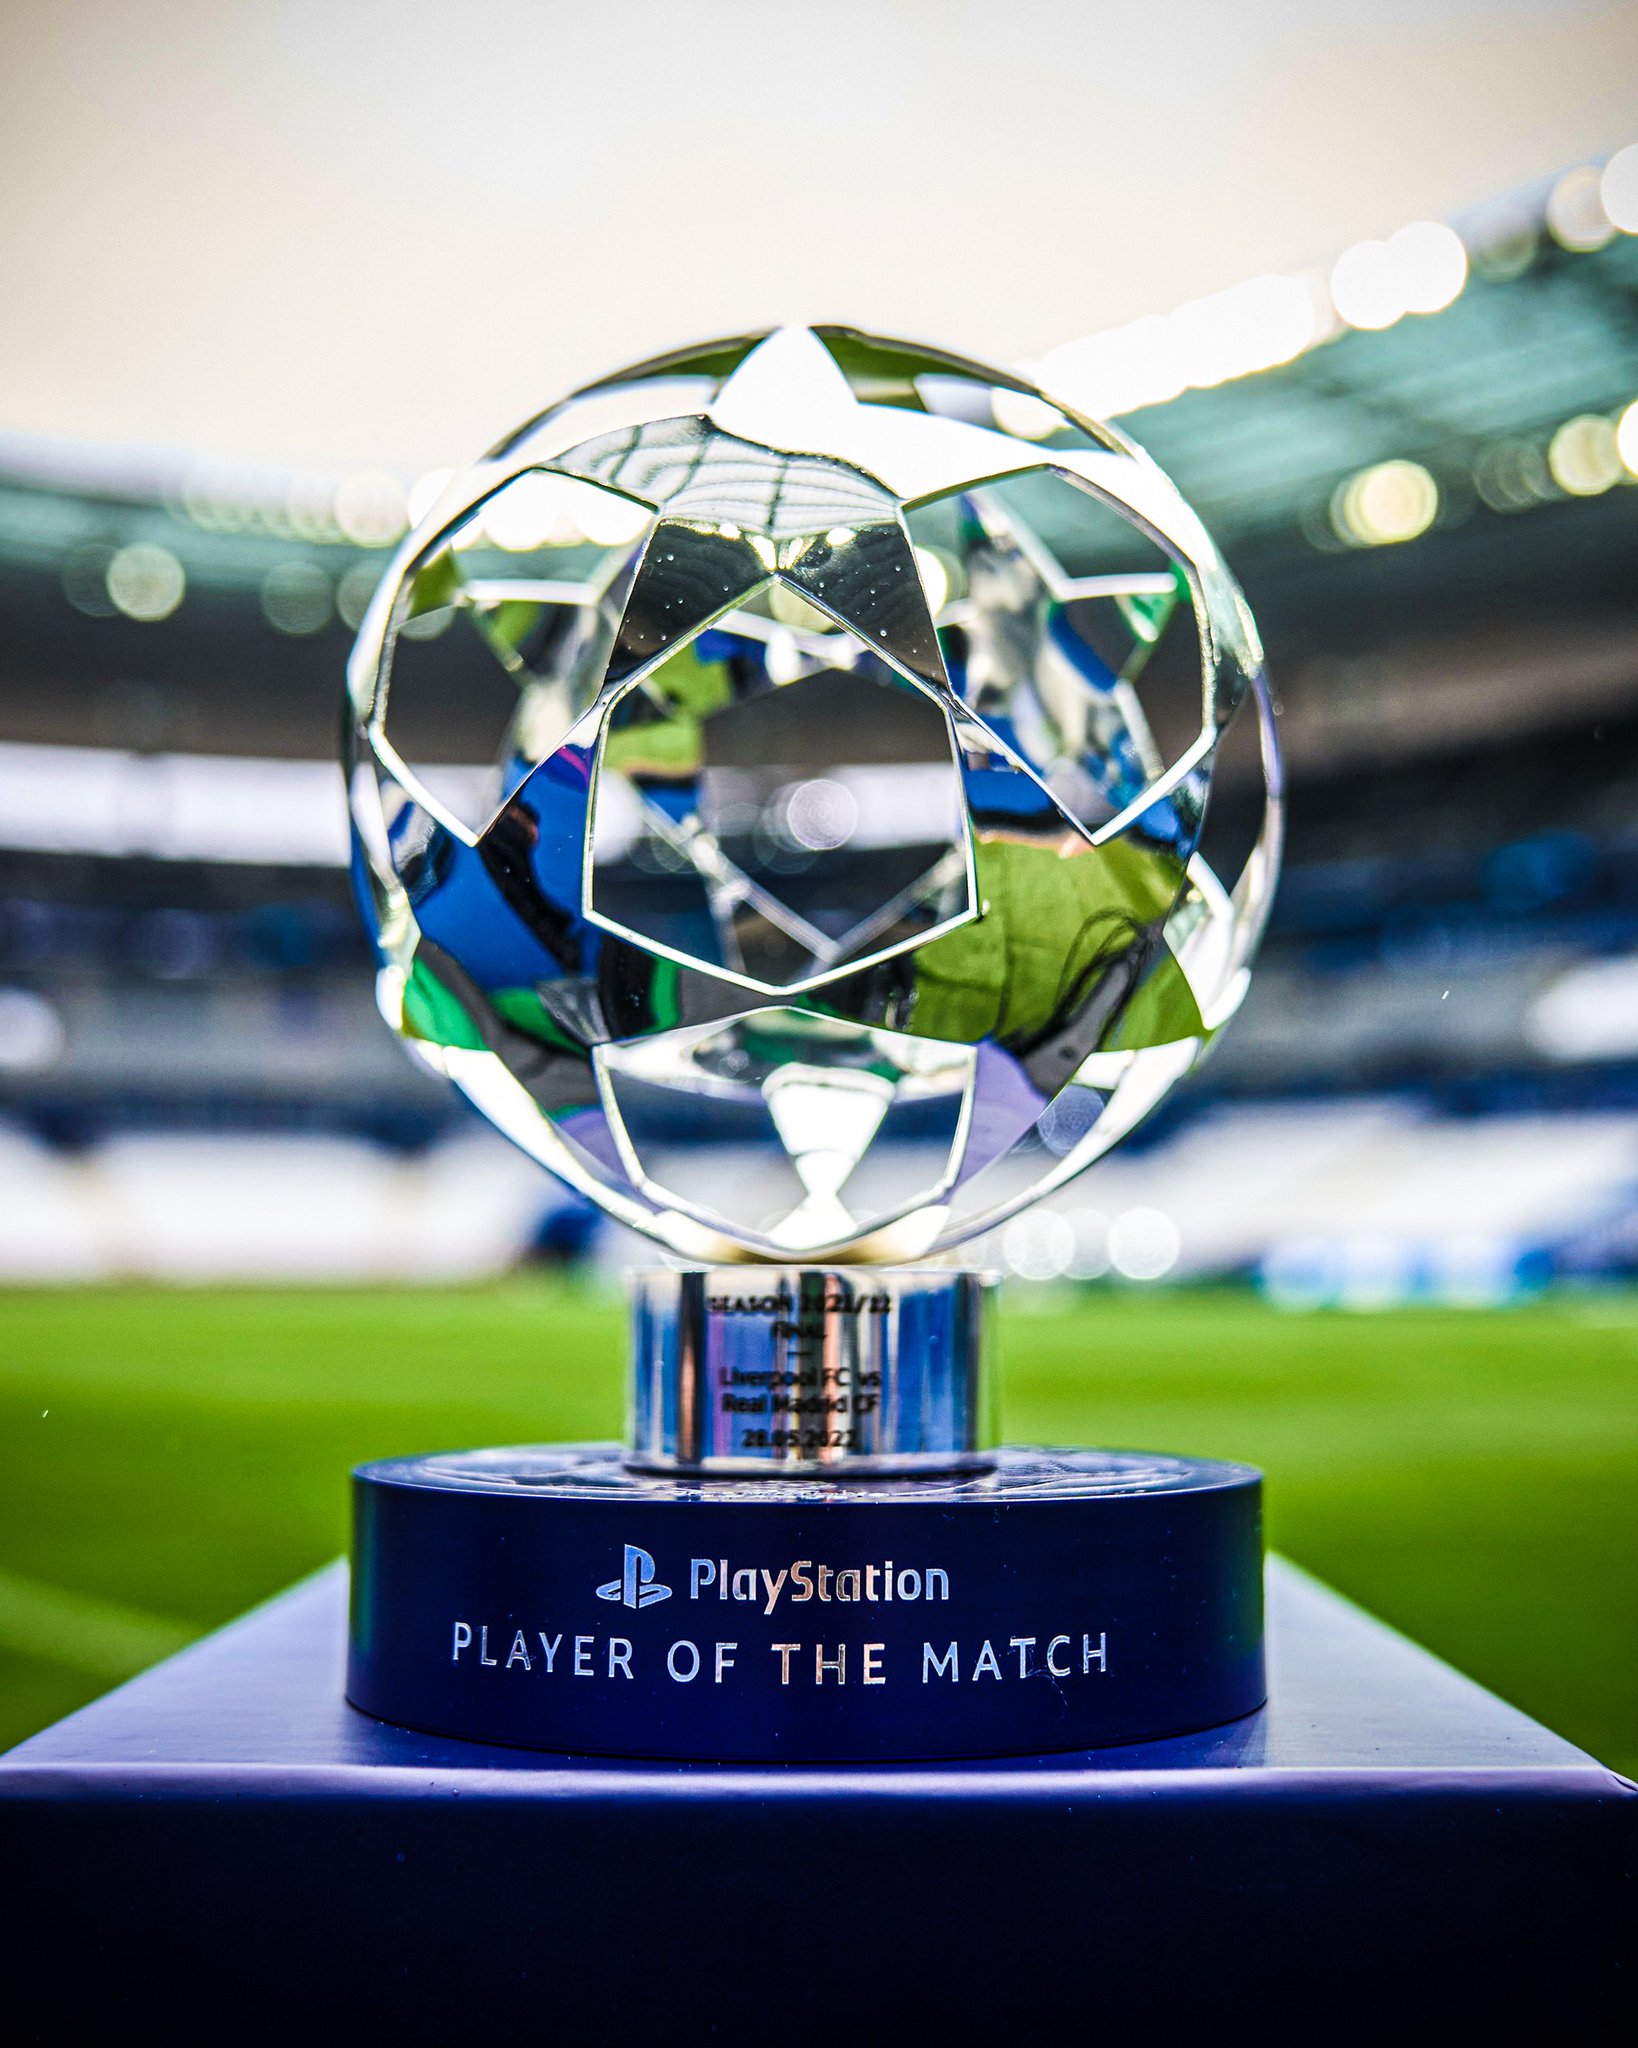 GOAL on Twitter "Player of the Match in the Champions League final